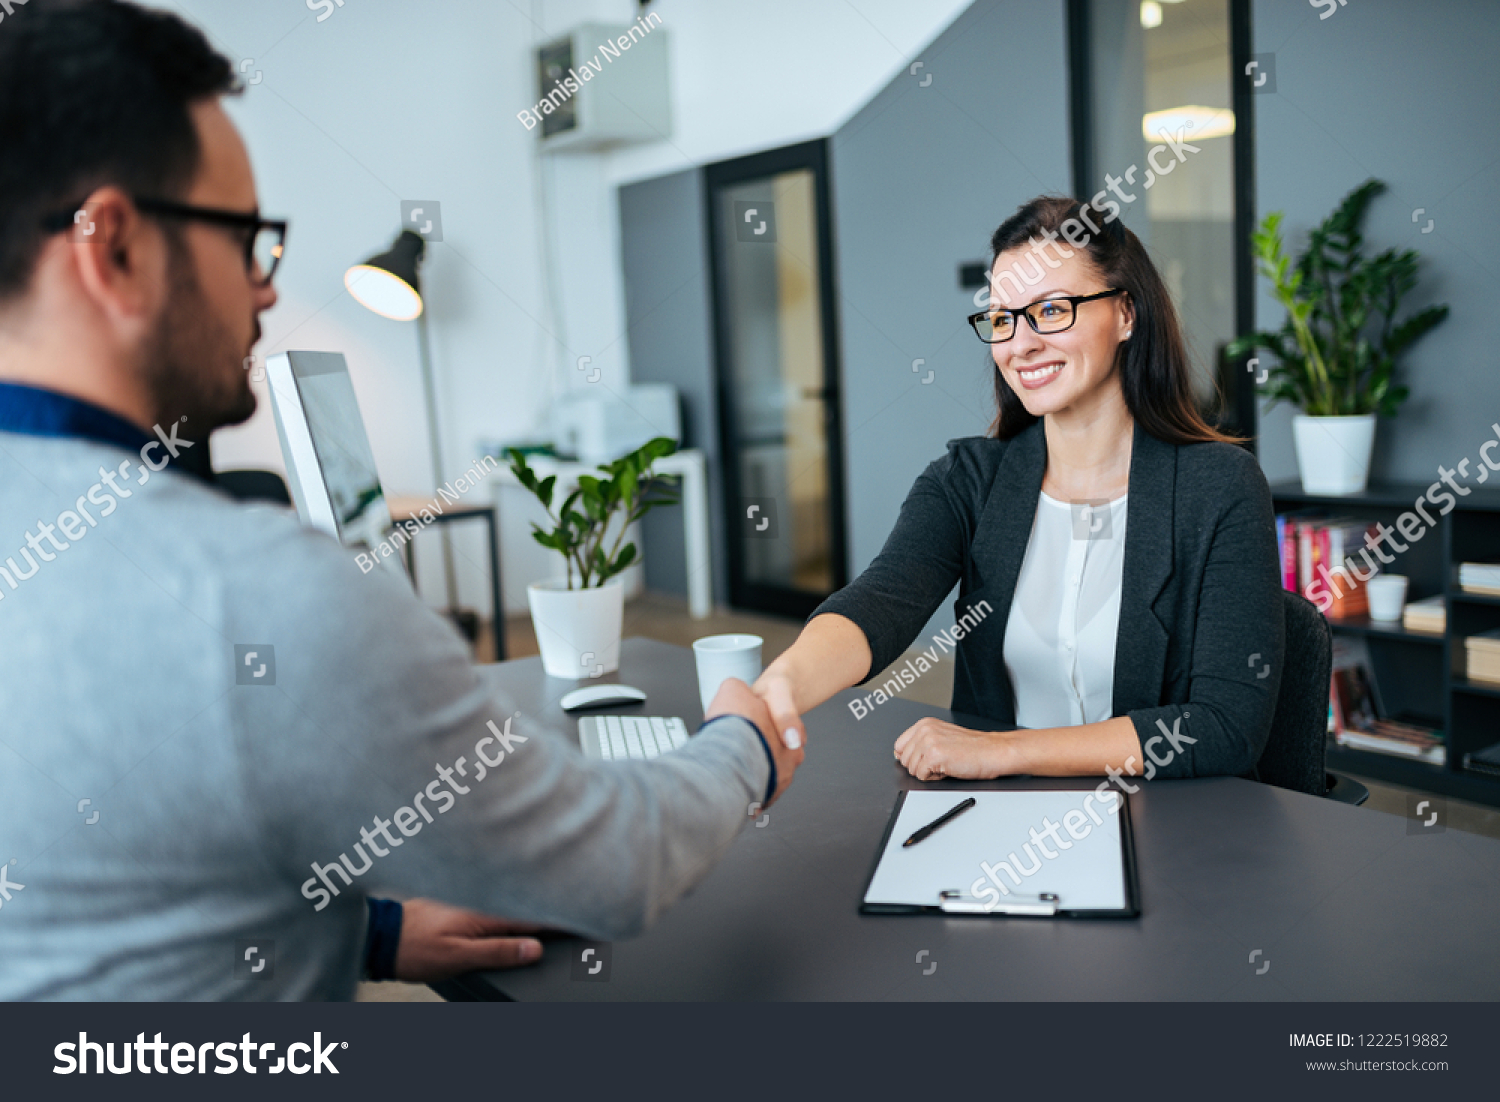 stock-photo-business-people-shaking-hands-in-modern-office-businesss-agreement-partnership-or-job-interview-1222519882